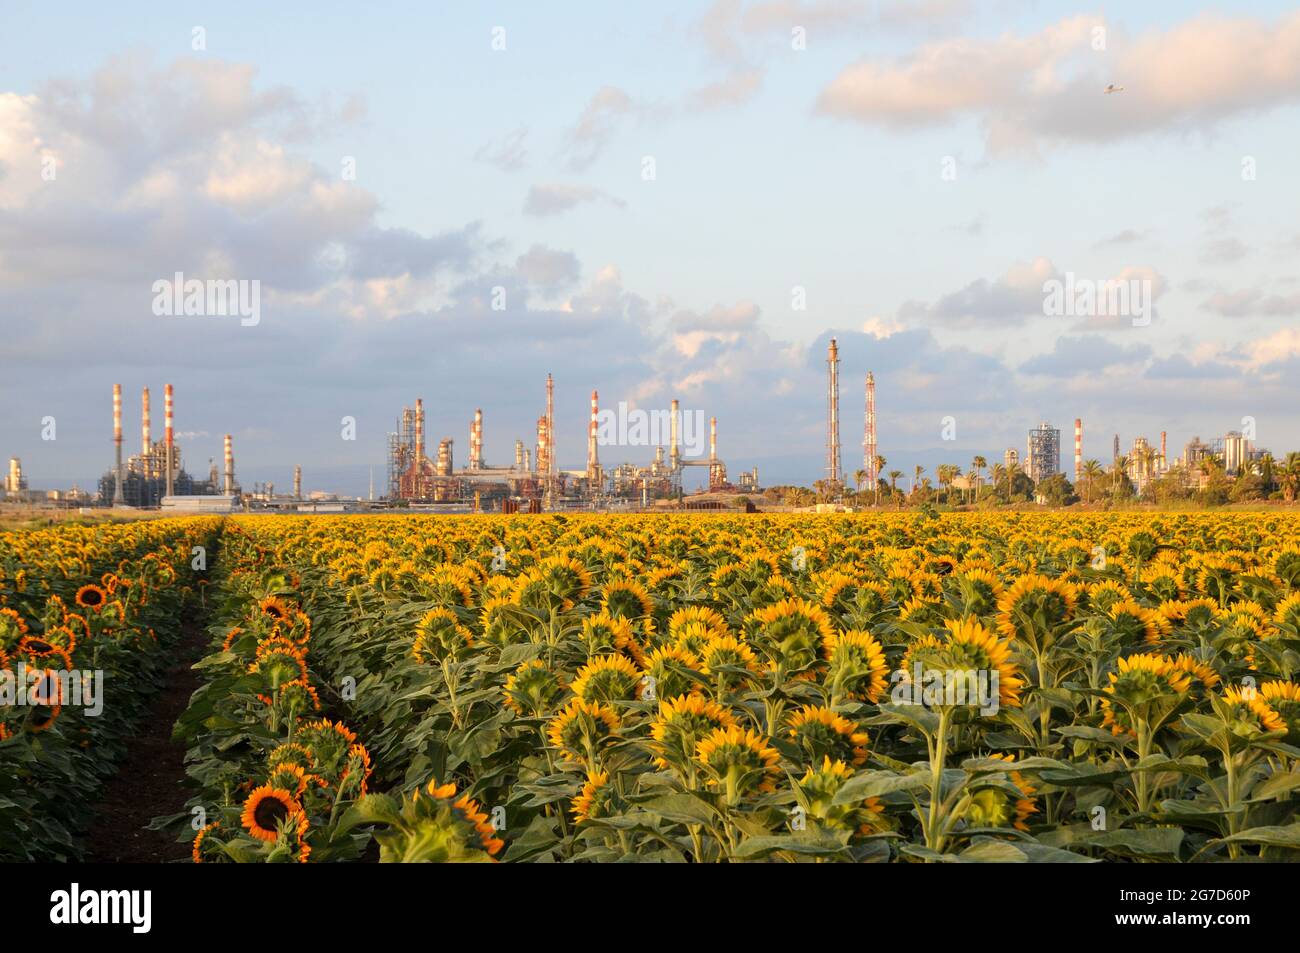 Farming and farmland in front of Ithe flues and chimneys of the Petrochemical factory Photographed in srael, Haifa bay Stock Photo